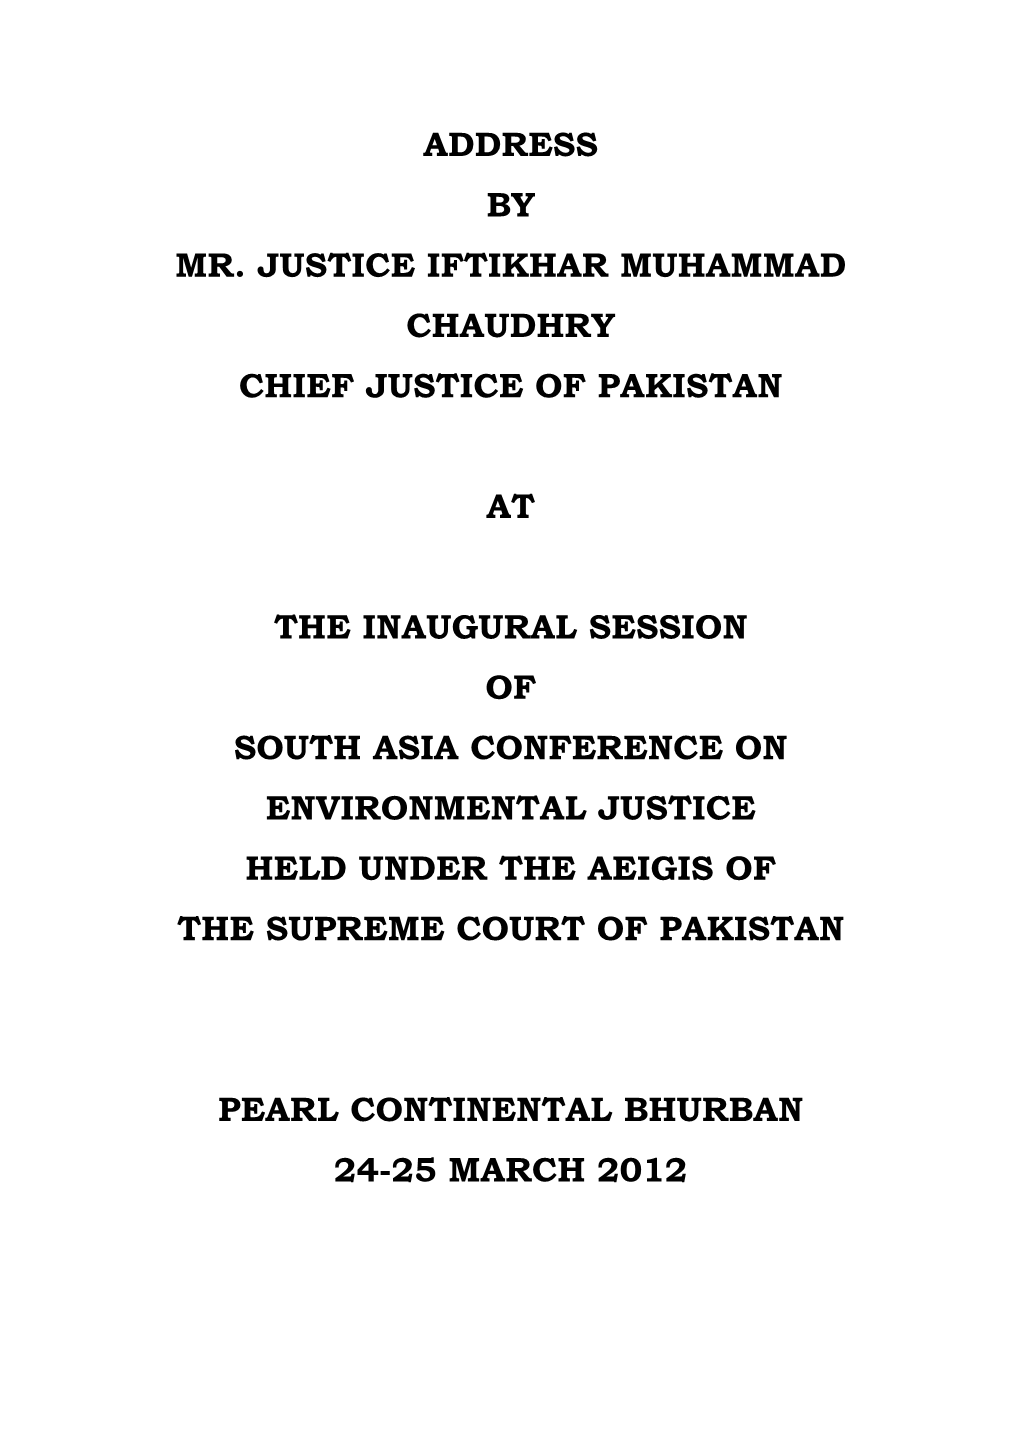 Address by Mr. Justice Iftikhar Muhammad Chaudhry Chief Justice of Pakistan at the Inaugural Session of South Asia Conference